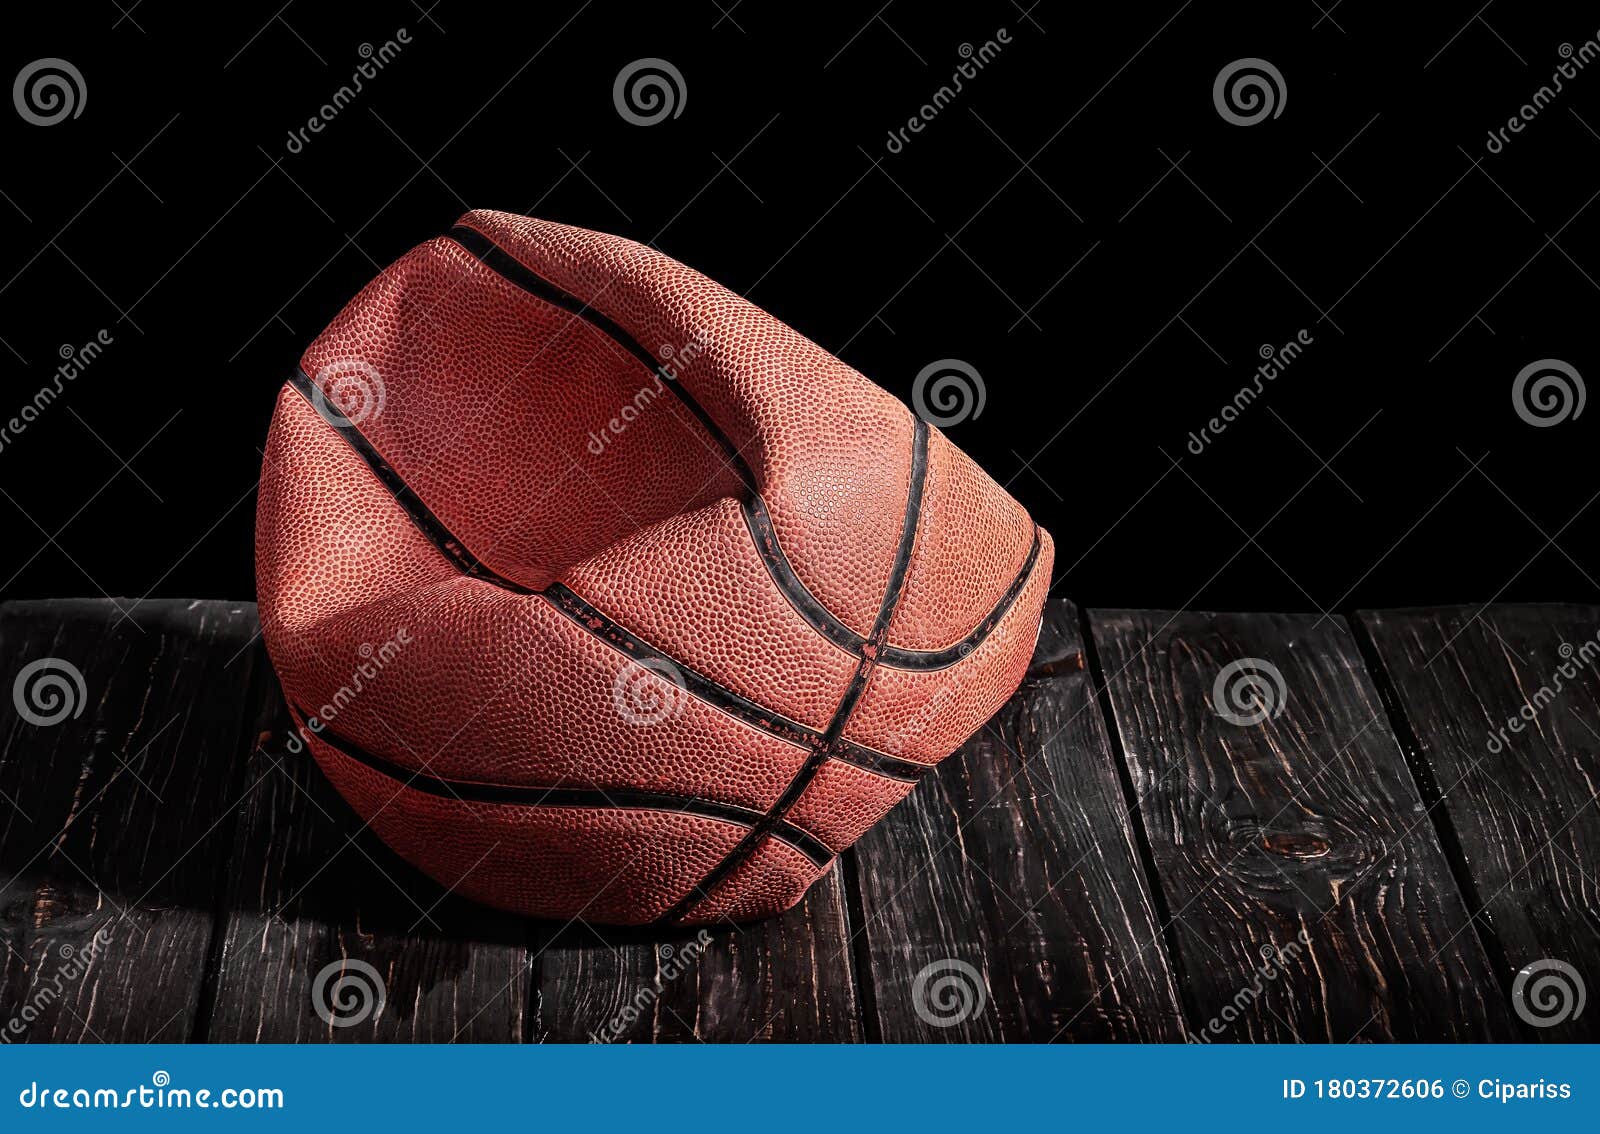 deflated and rumpled old ball on a wooden floor